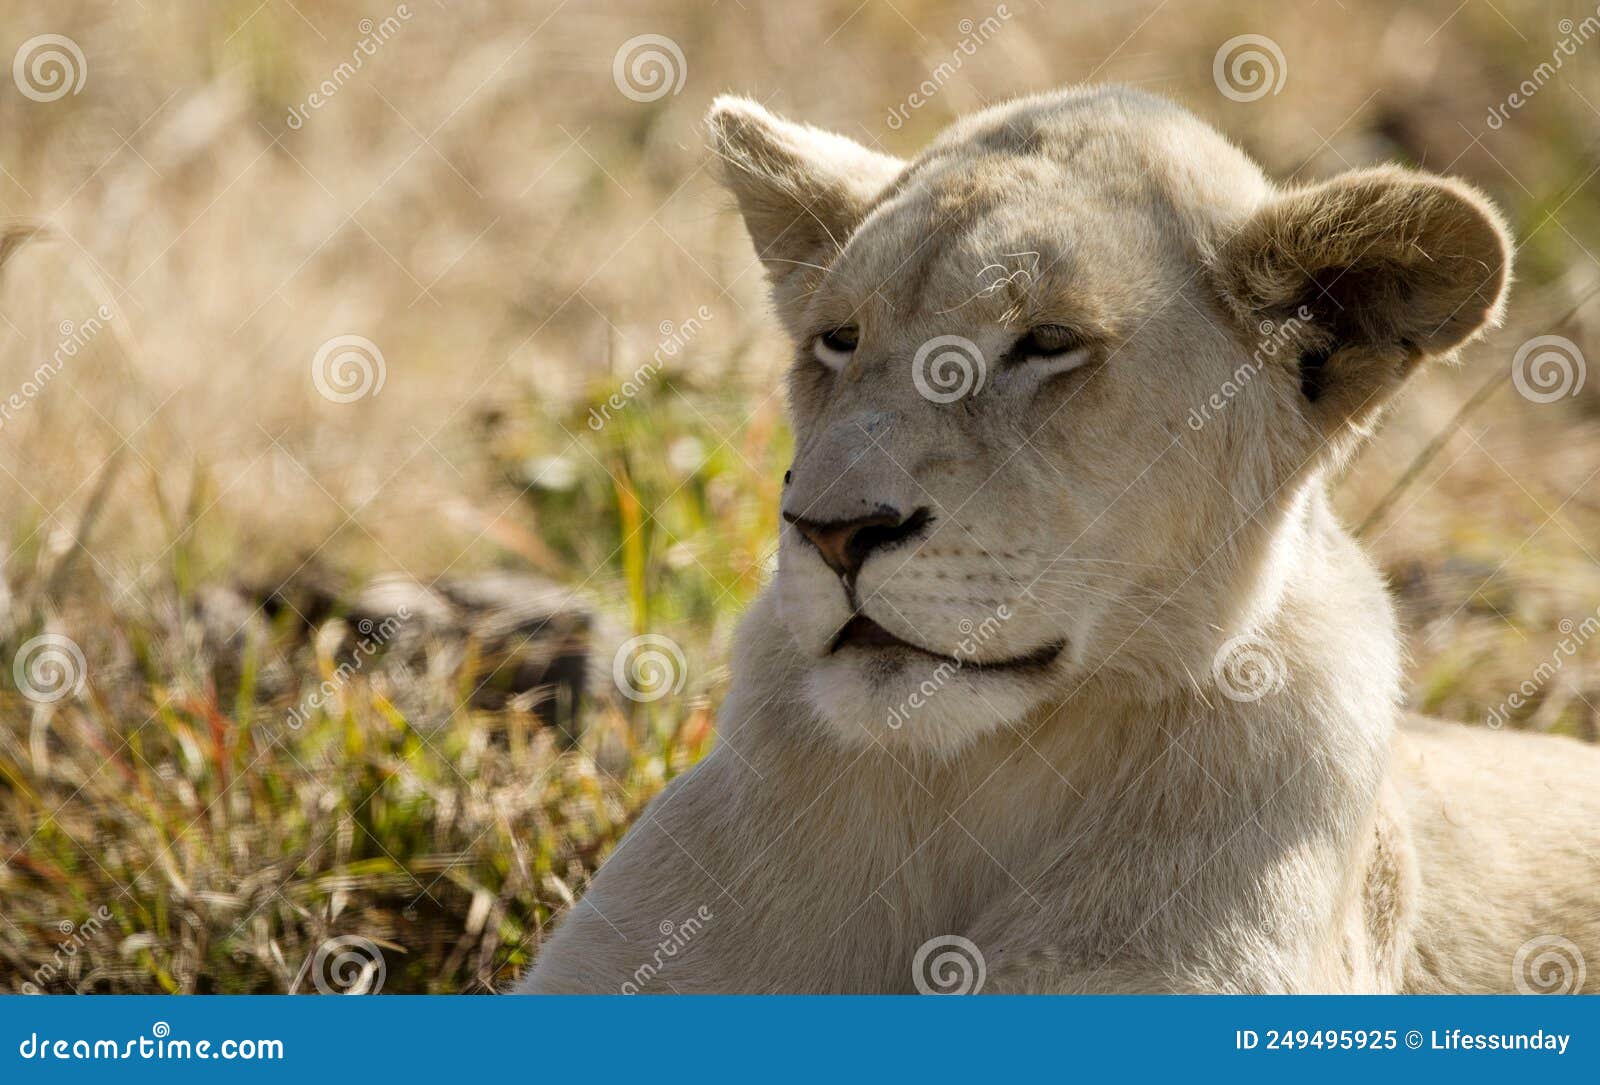 young lion enjoying the african savannah environment of south africa is the star of the safaris